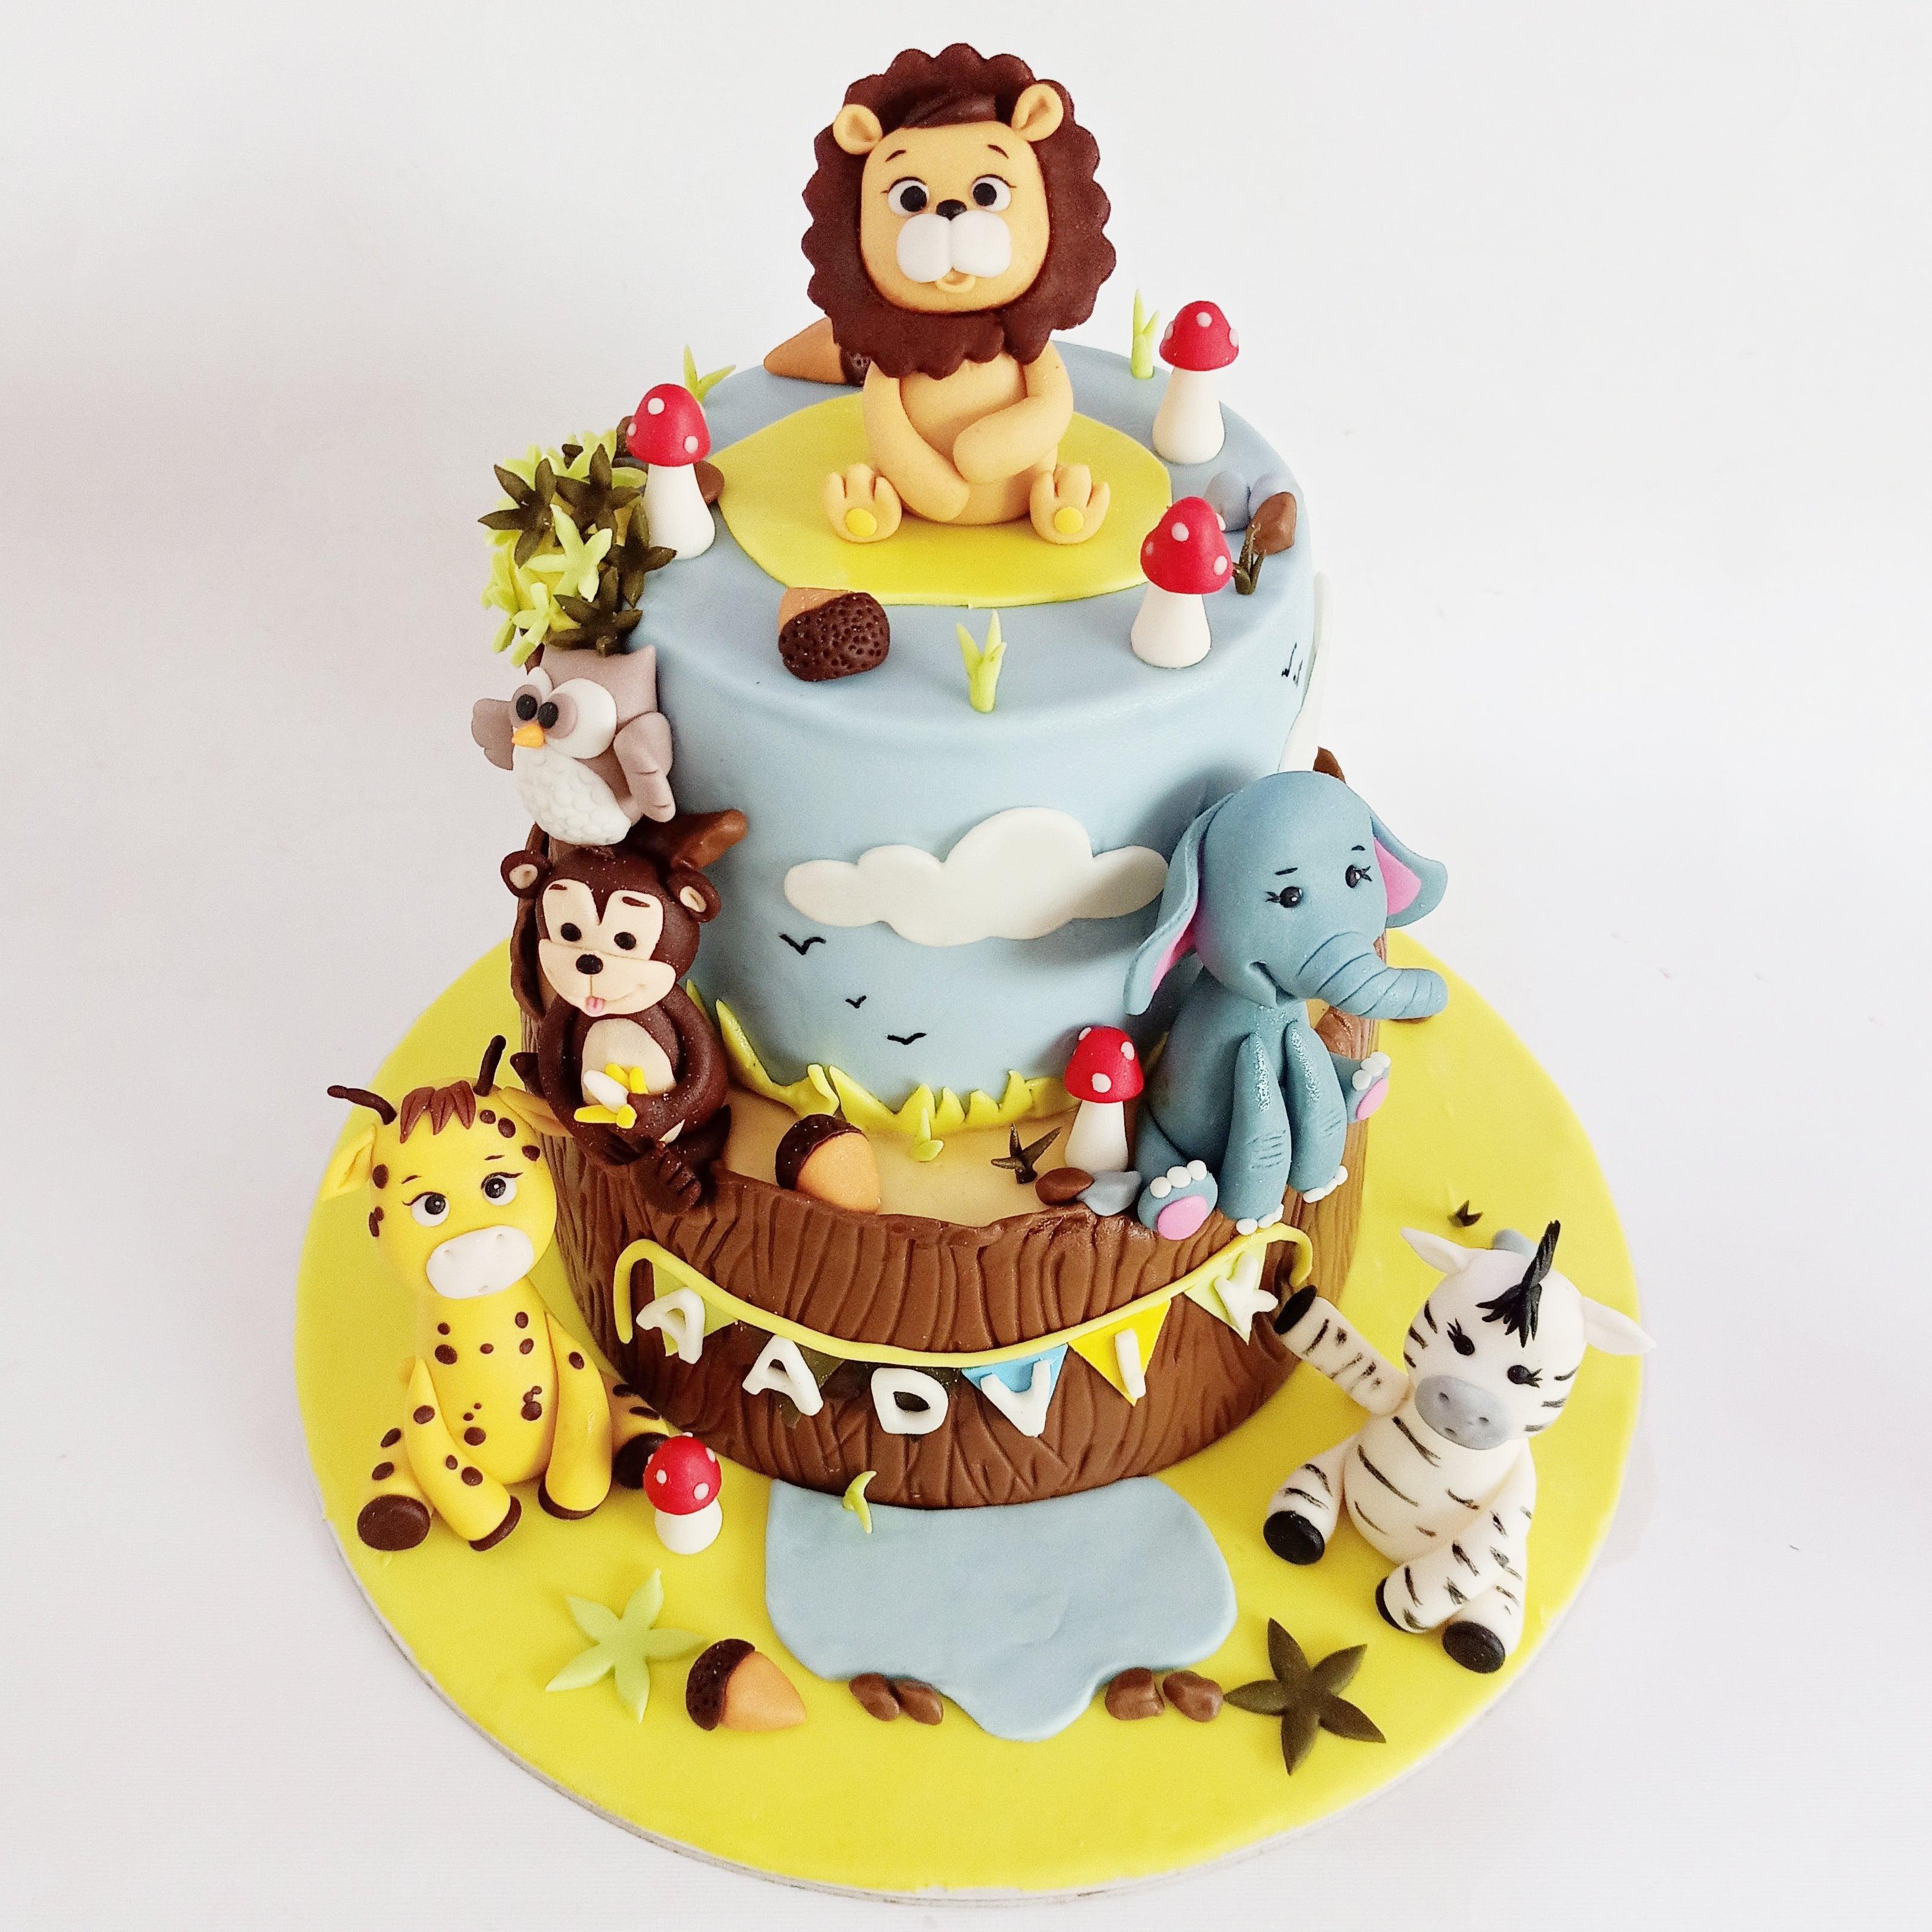 35 Adorable Birthday Cake Ideas for Little Ones : Jungle Theme Cake